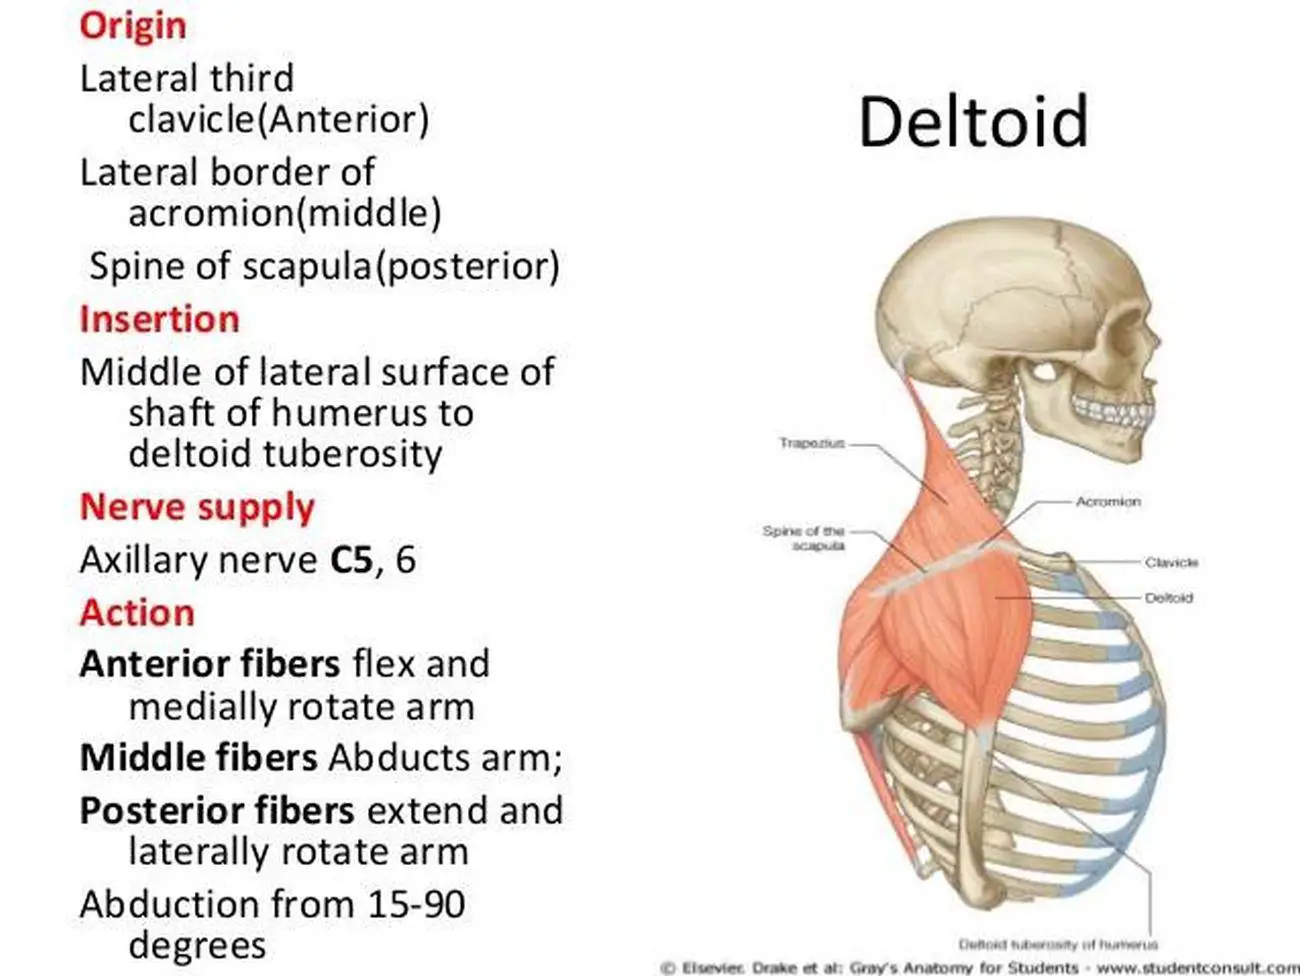 Pictures Of Anterior Fibers Of The Deltoid